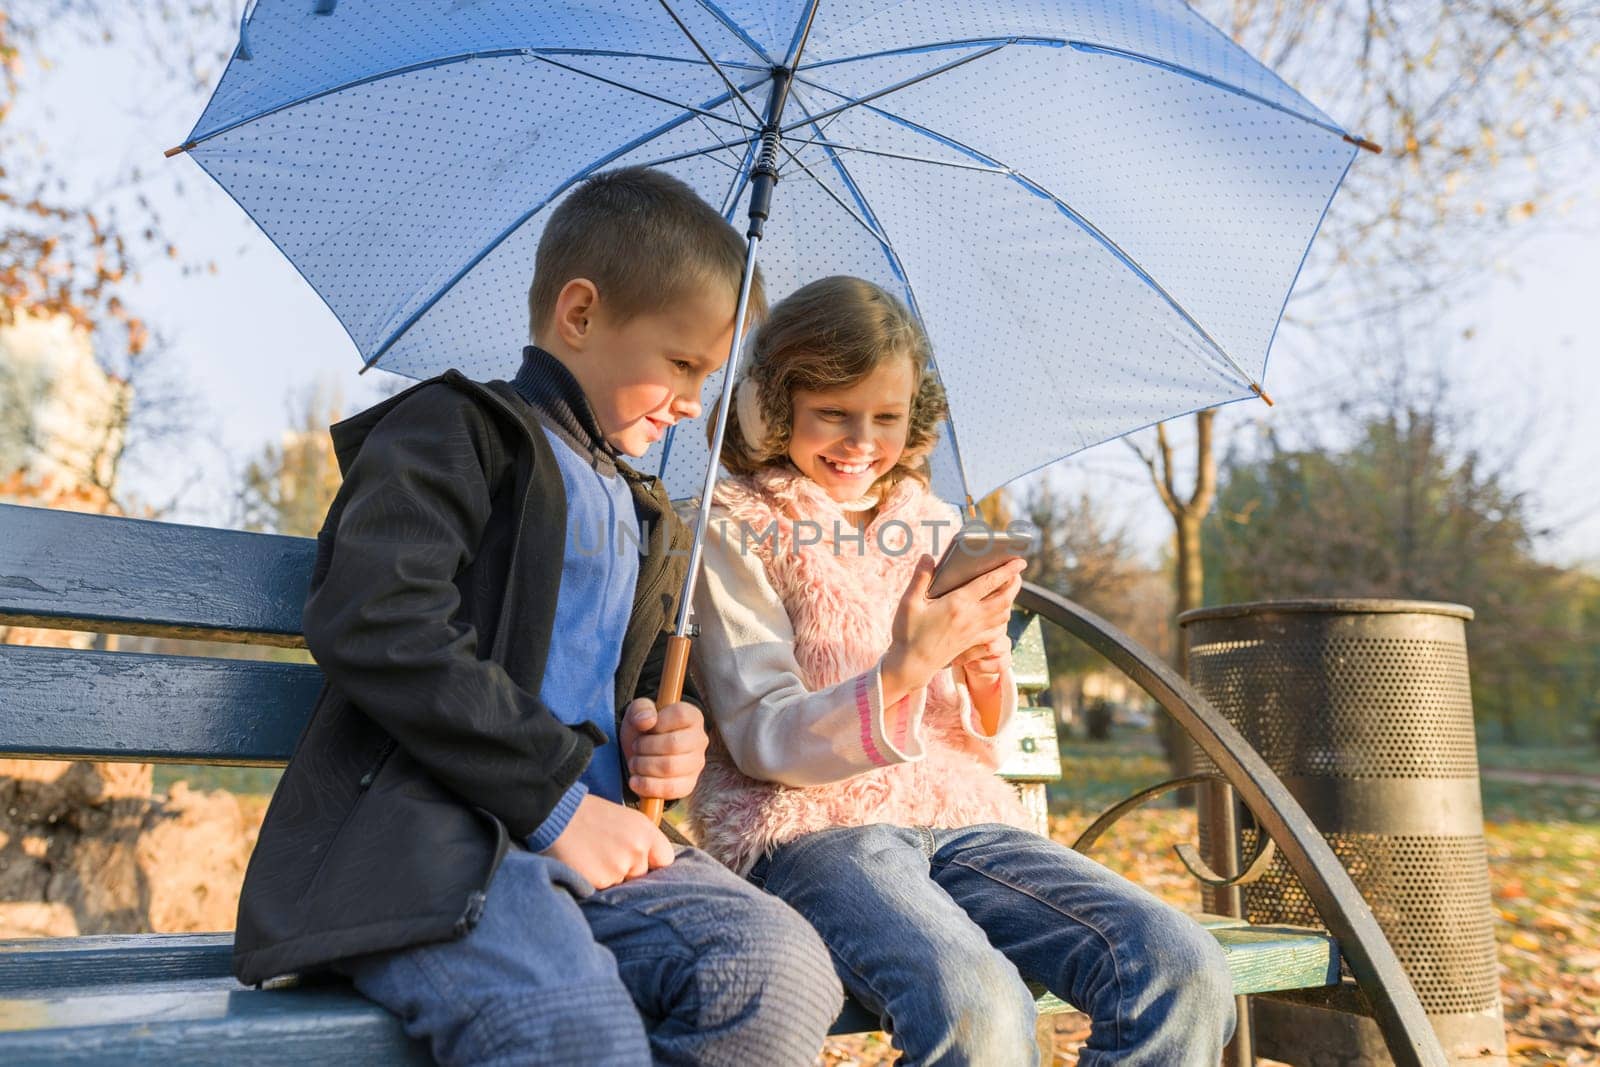 Outdoor portrait of two smiling children boy and girl, sitting under an umbrella on bench in autumn park, using smartphone, golden hour